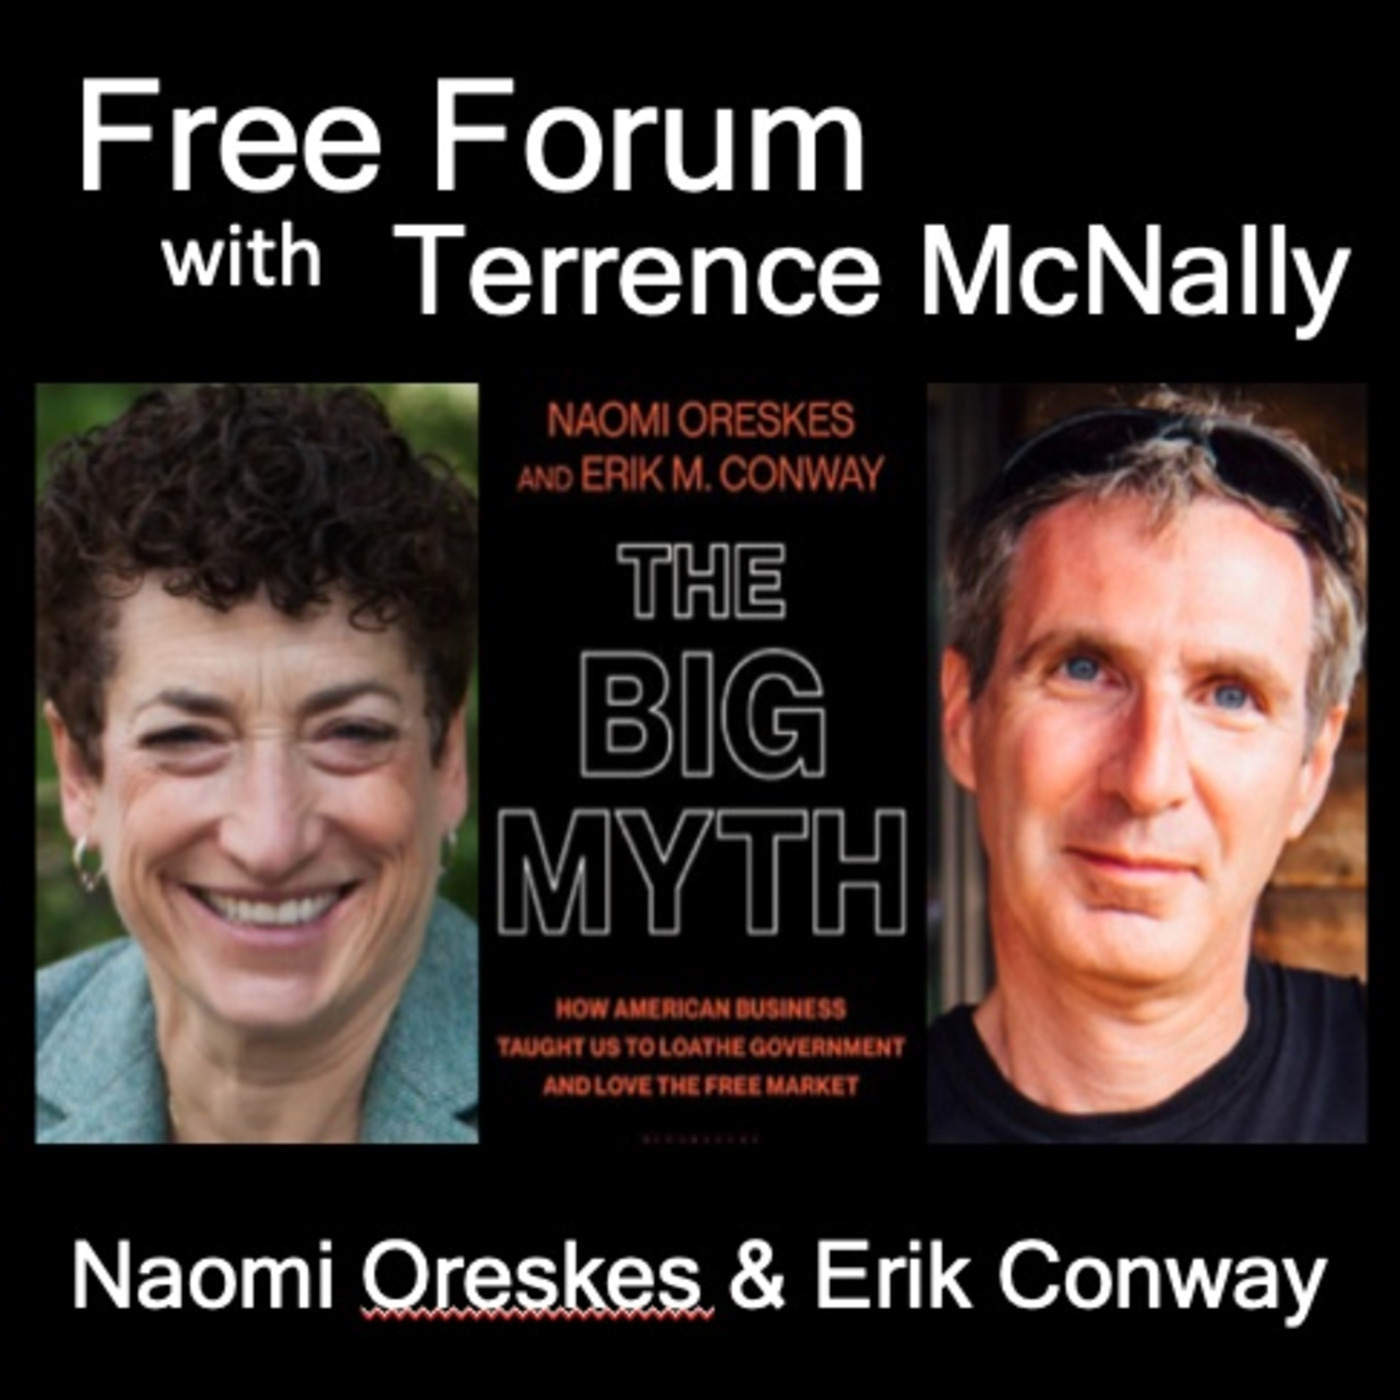 Episode 600: NAOMI ORESKES & ERIK CONWAY - THE BIG MYTH: How American Business Taught Us to Loathe Government and Love the Free Market